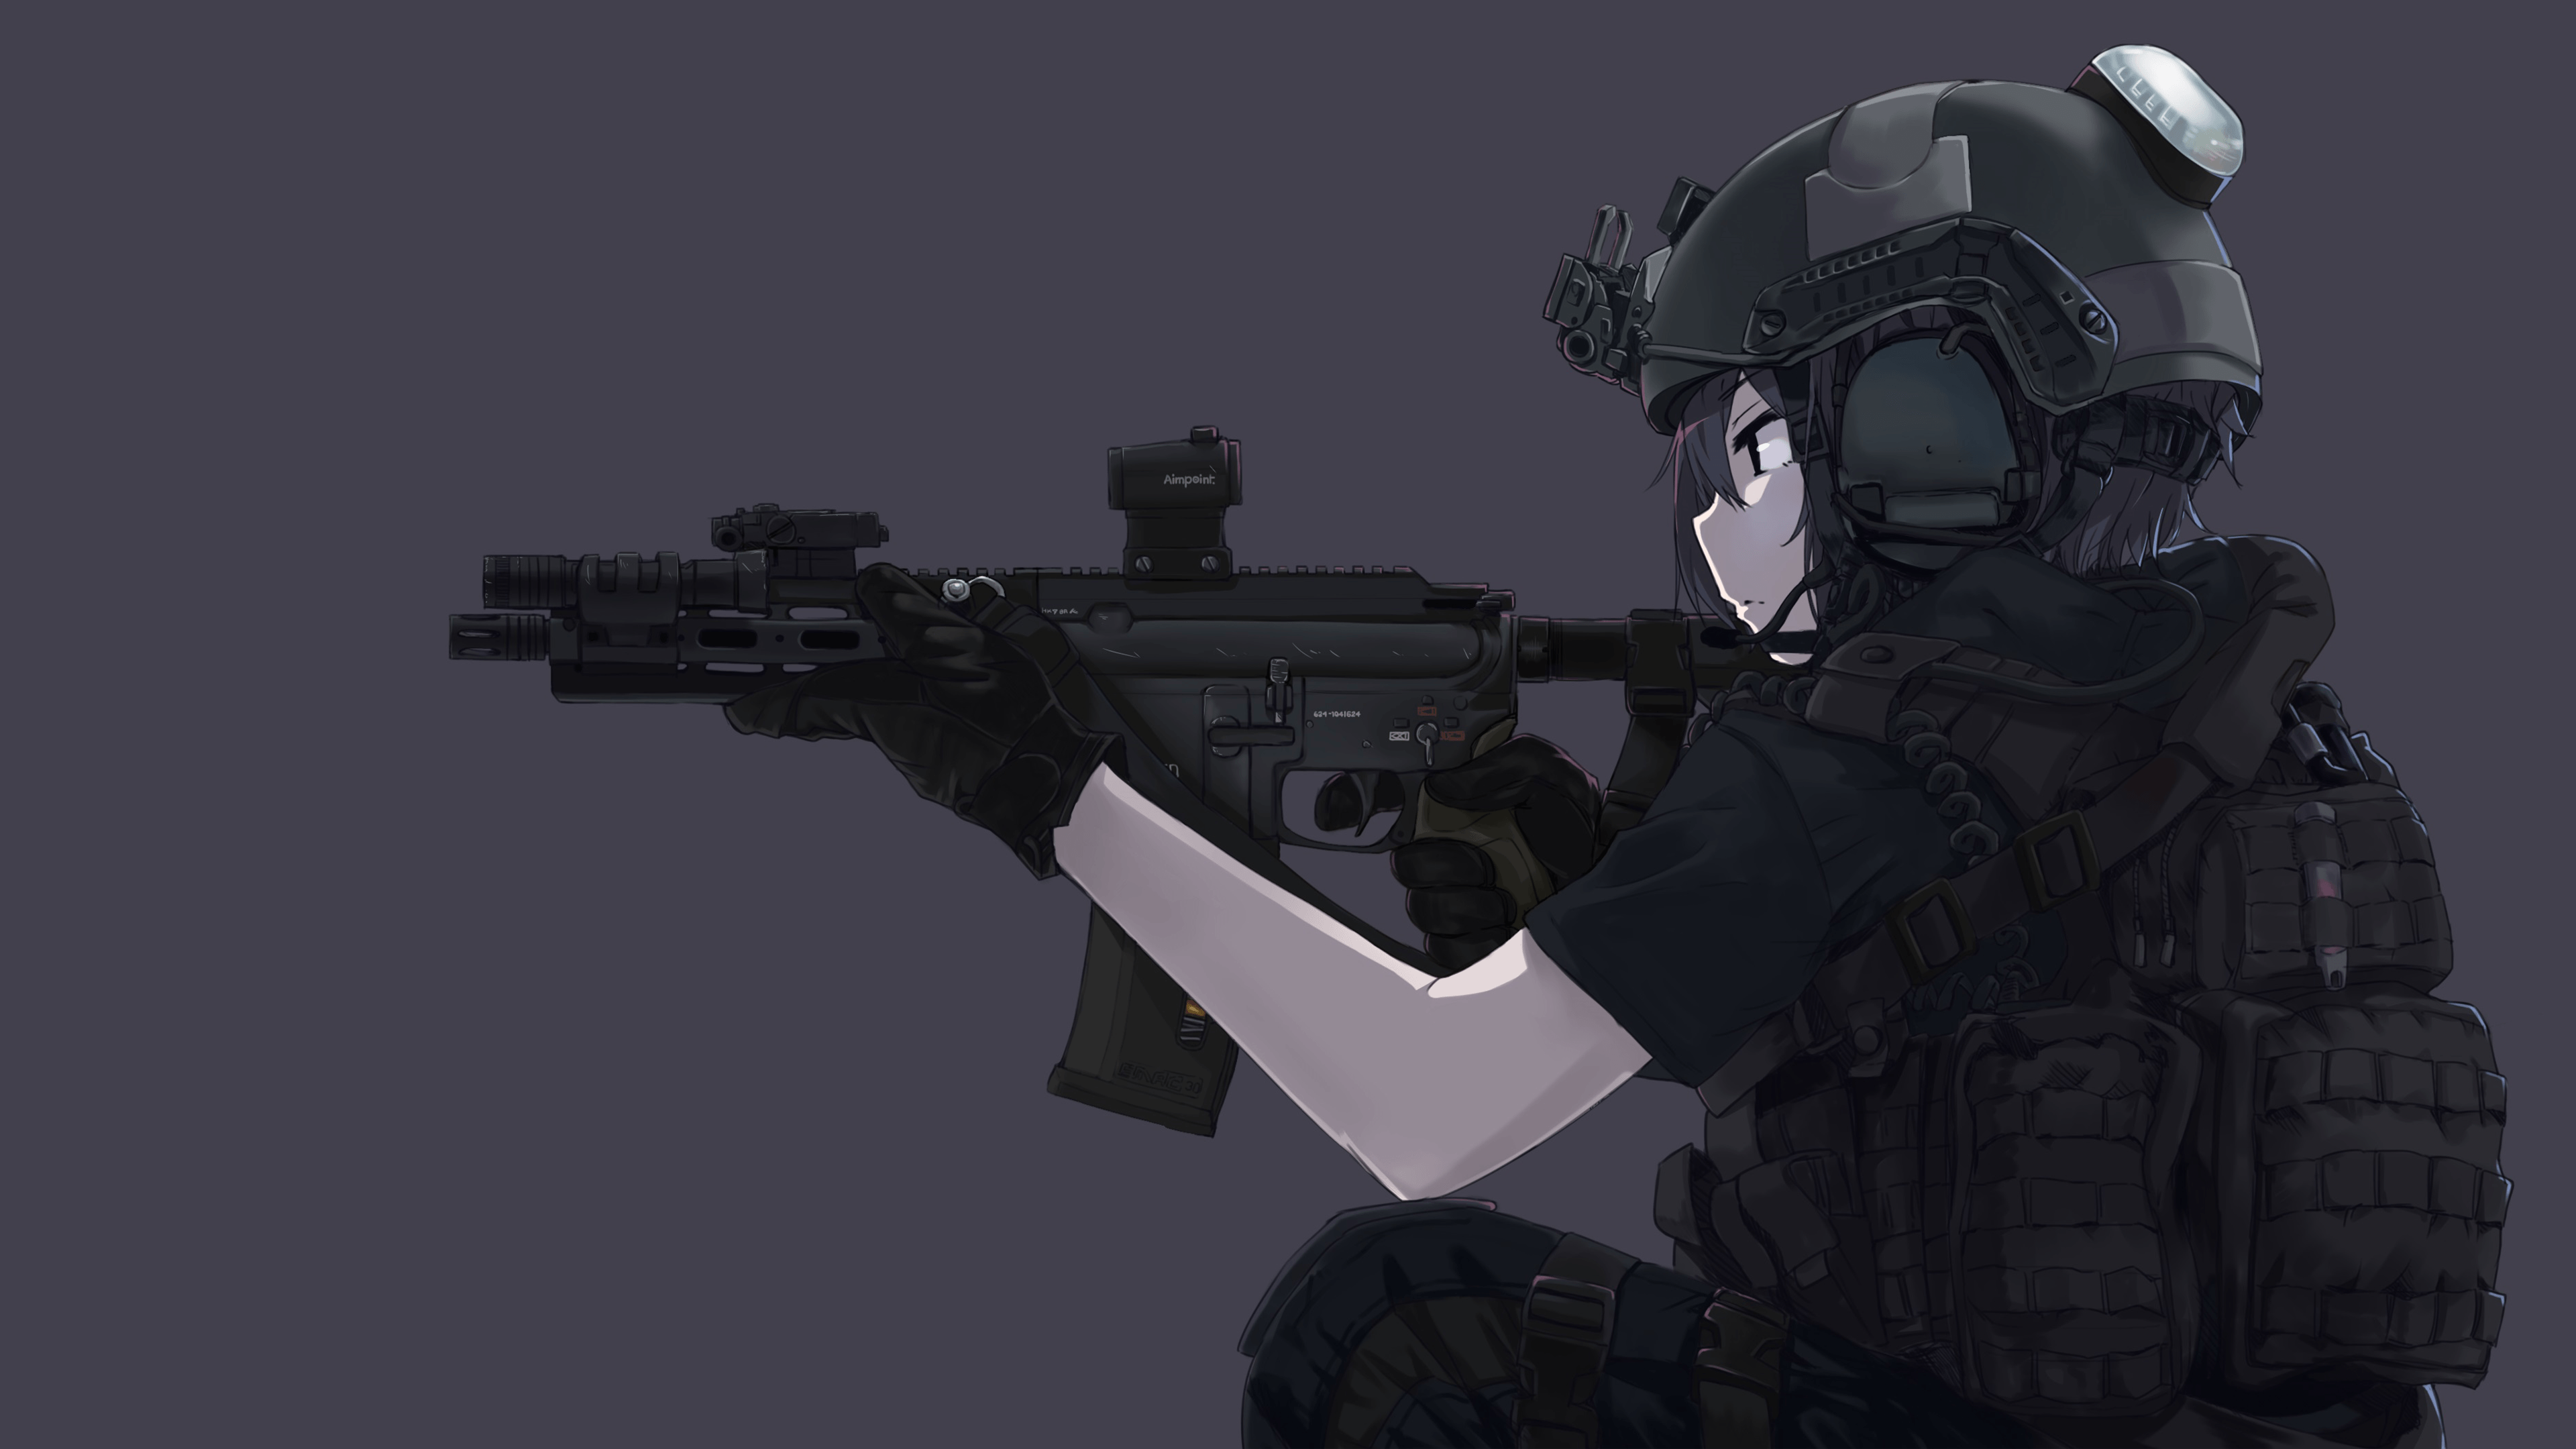 LAPD SWAT 4k Ultra HD Wallpaper and Background Imagex2160